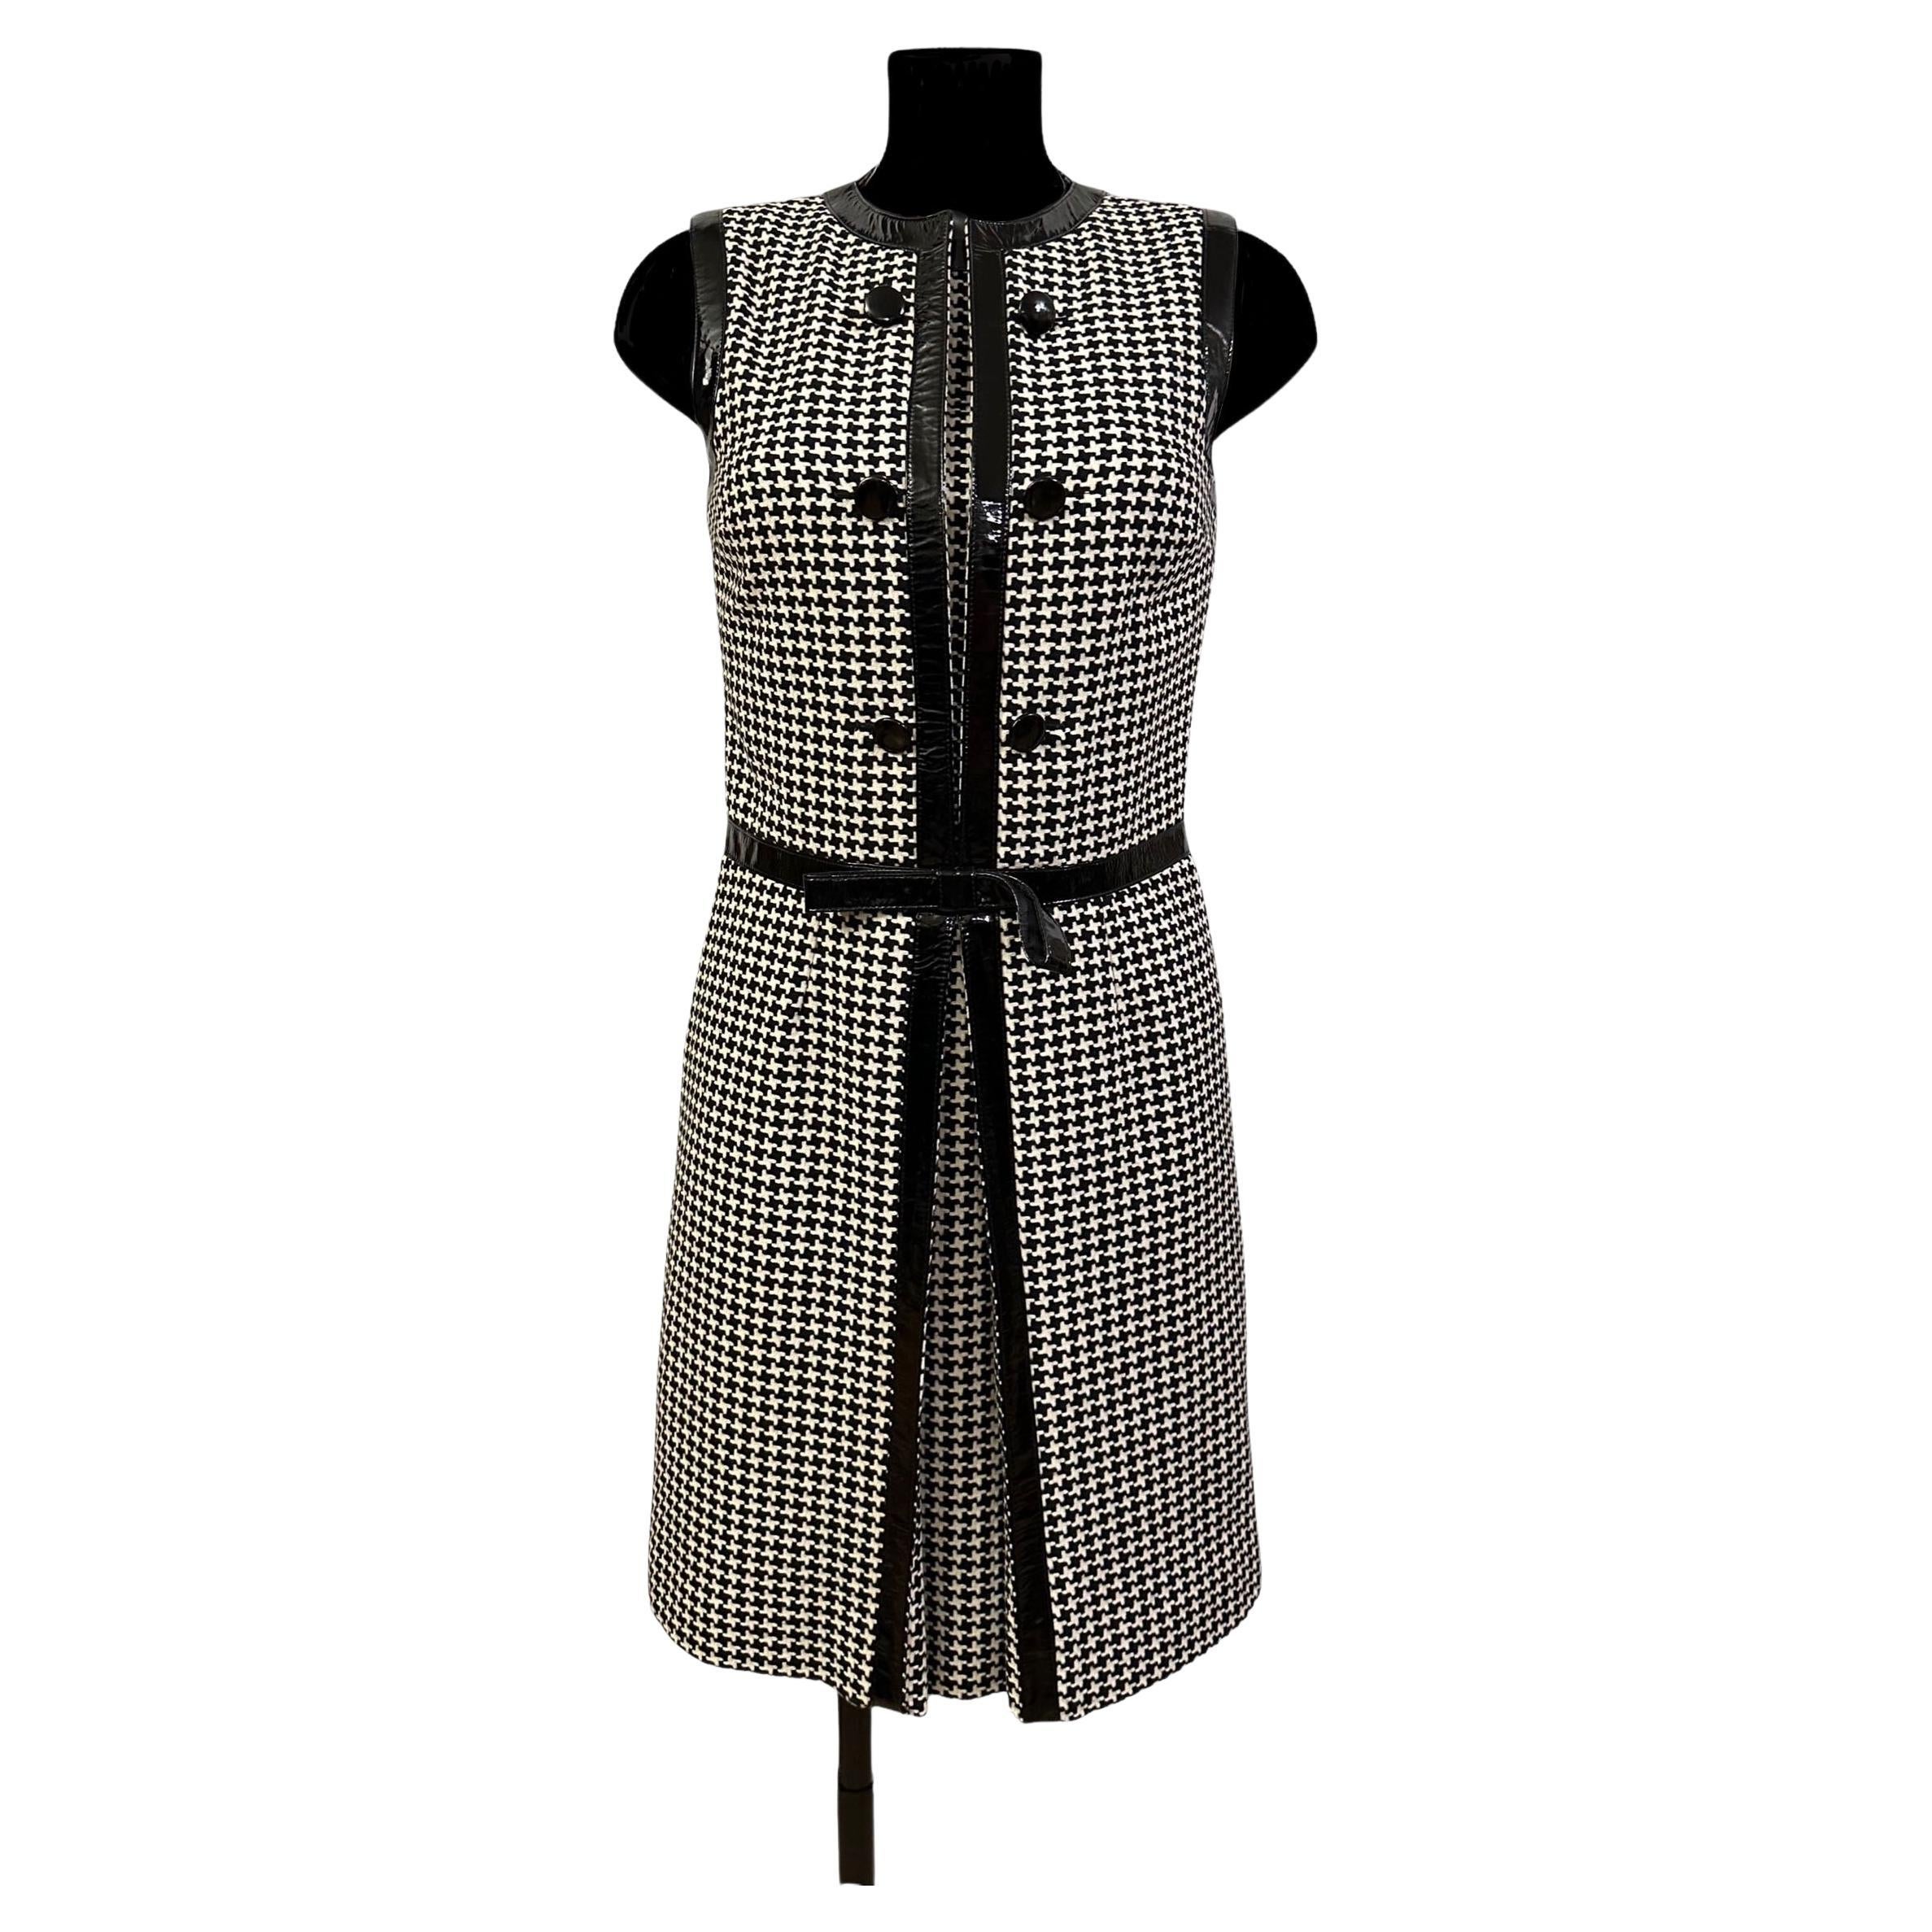 Christian Dior Fall 2008 Black and Off-white Houndstooth Dress by John Galliano For Sale